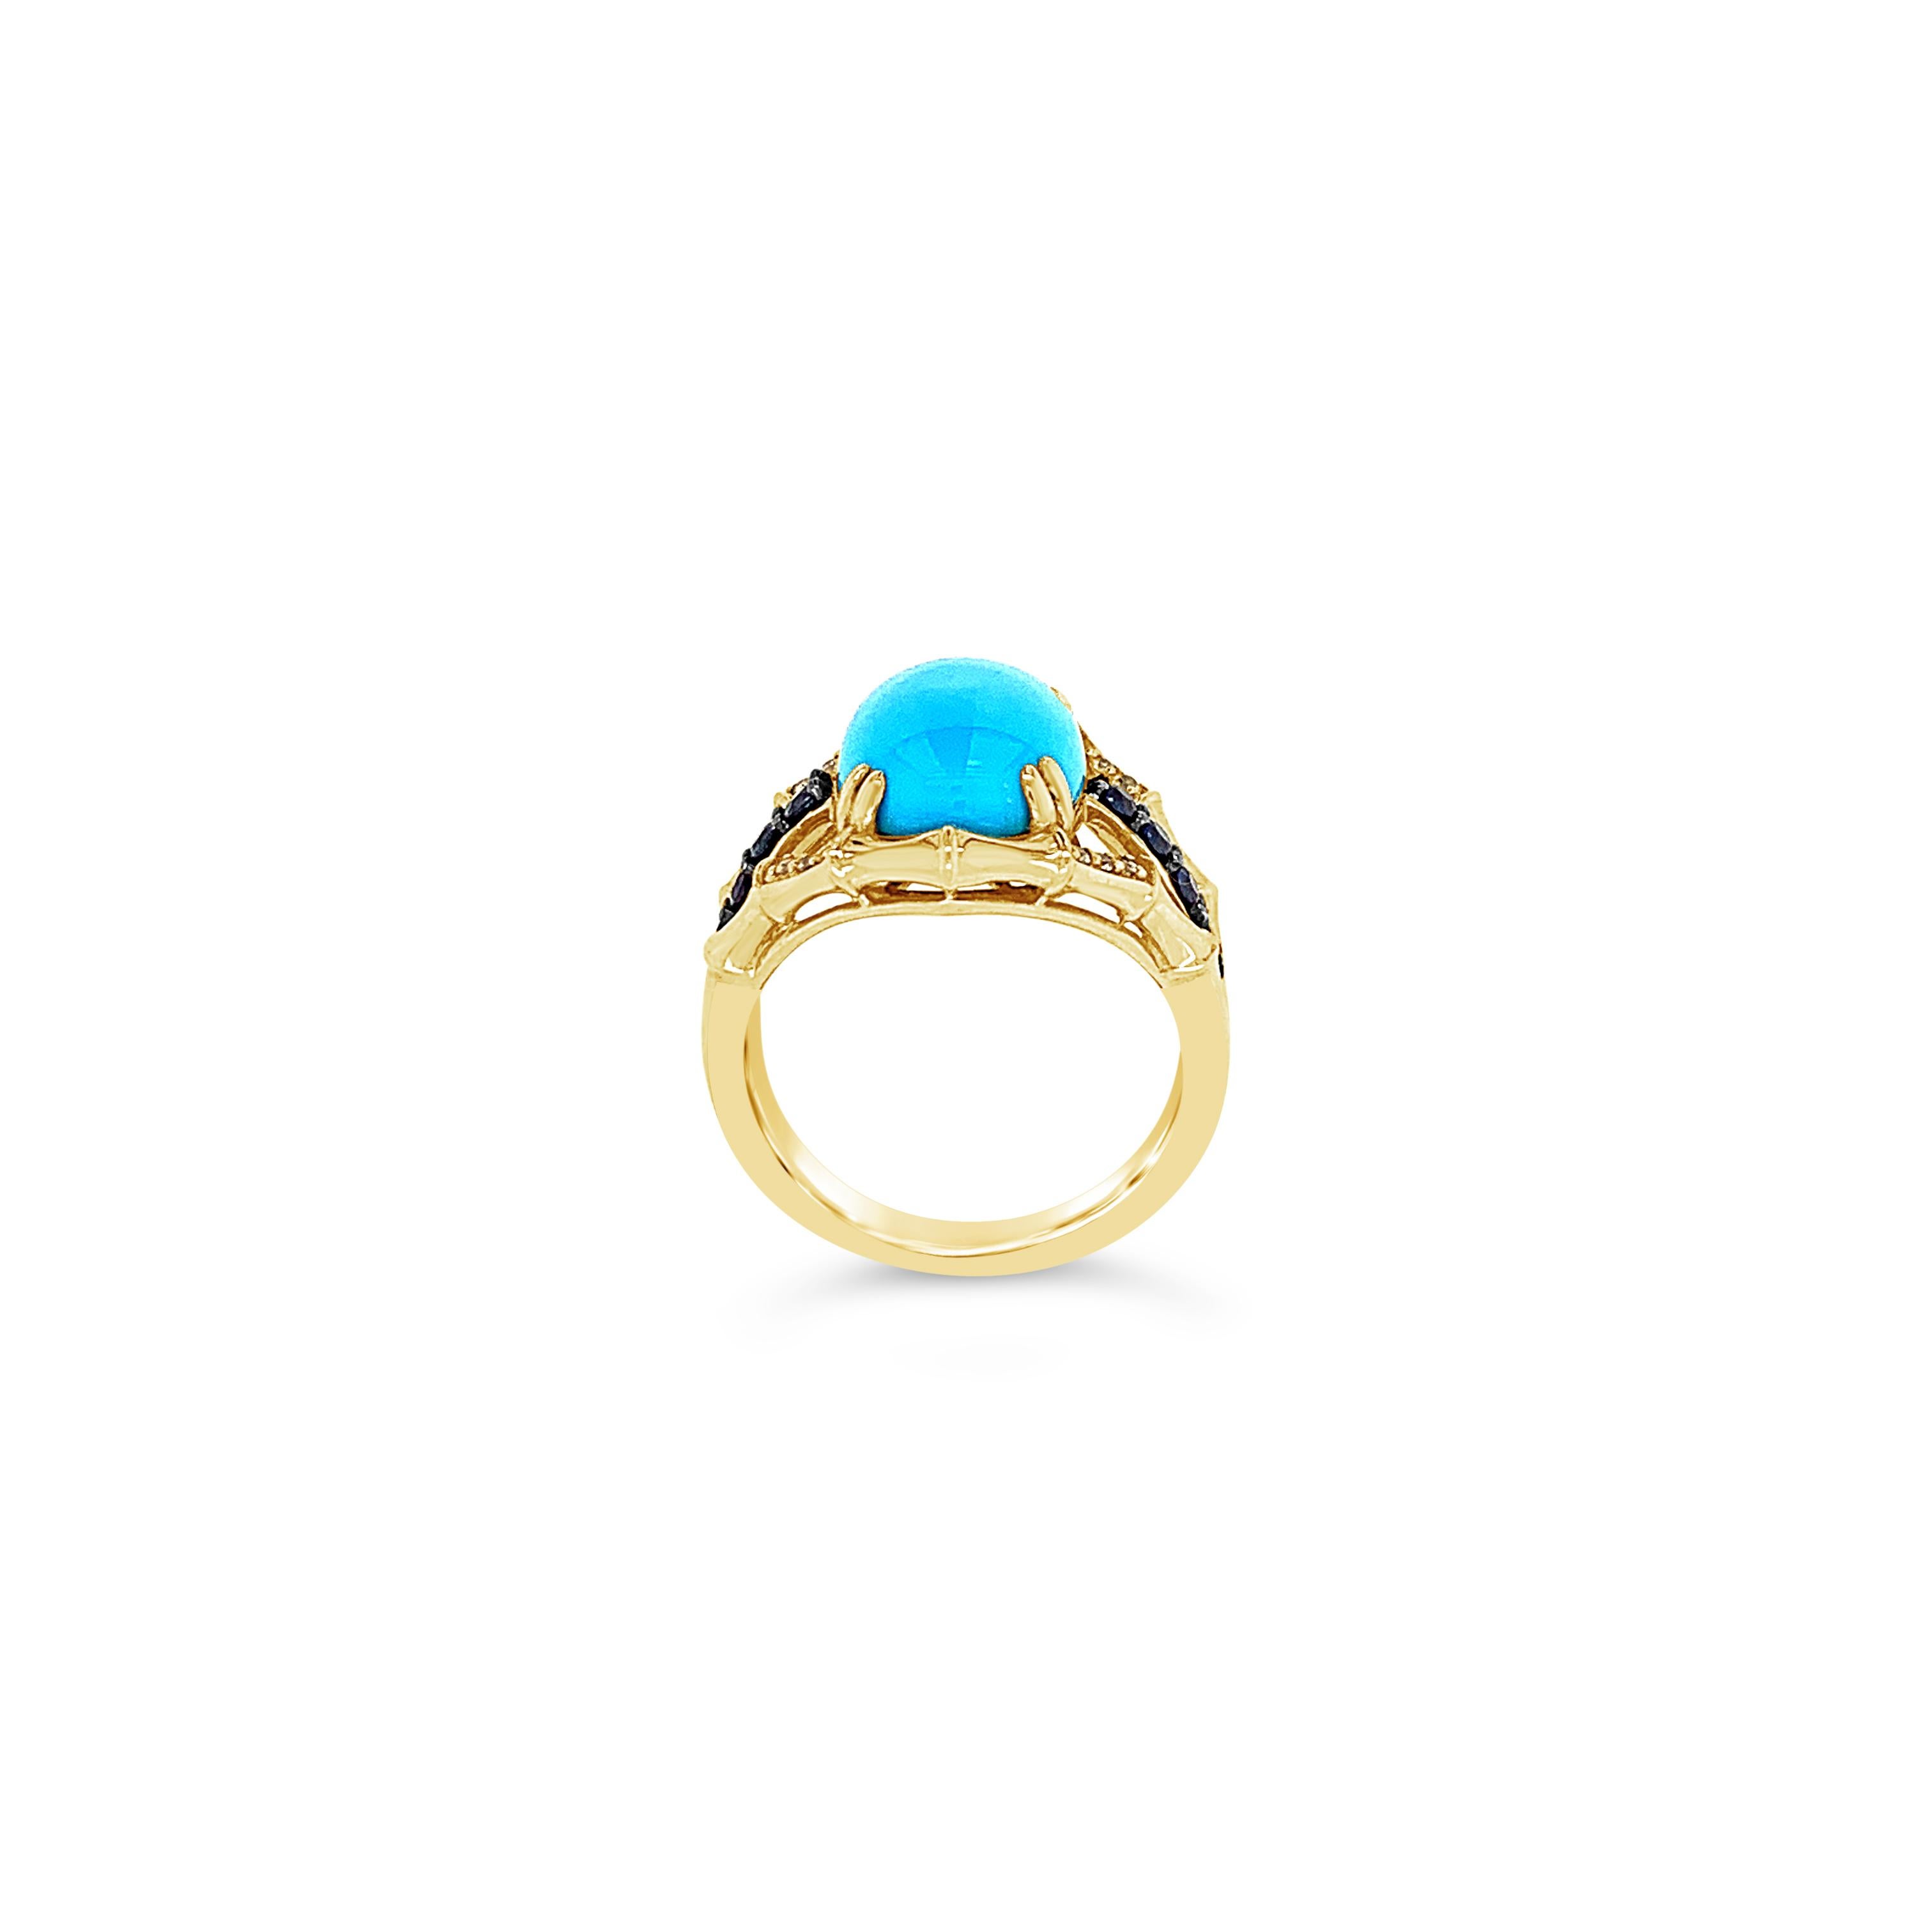 Carlo Viani® Ring featuring 1/3 cts. Blueberry Sapphire™, 1/8 cts. White Sapphire, Robins Egg Blue Turquoise™, set in 14K Honey Gold™

Diamonds Breakdown:
None

Gems Breakdown:
14x10mm Turquoise
1/3 cts Sapphire
1/8 cts White Sapphire


Please feel